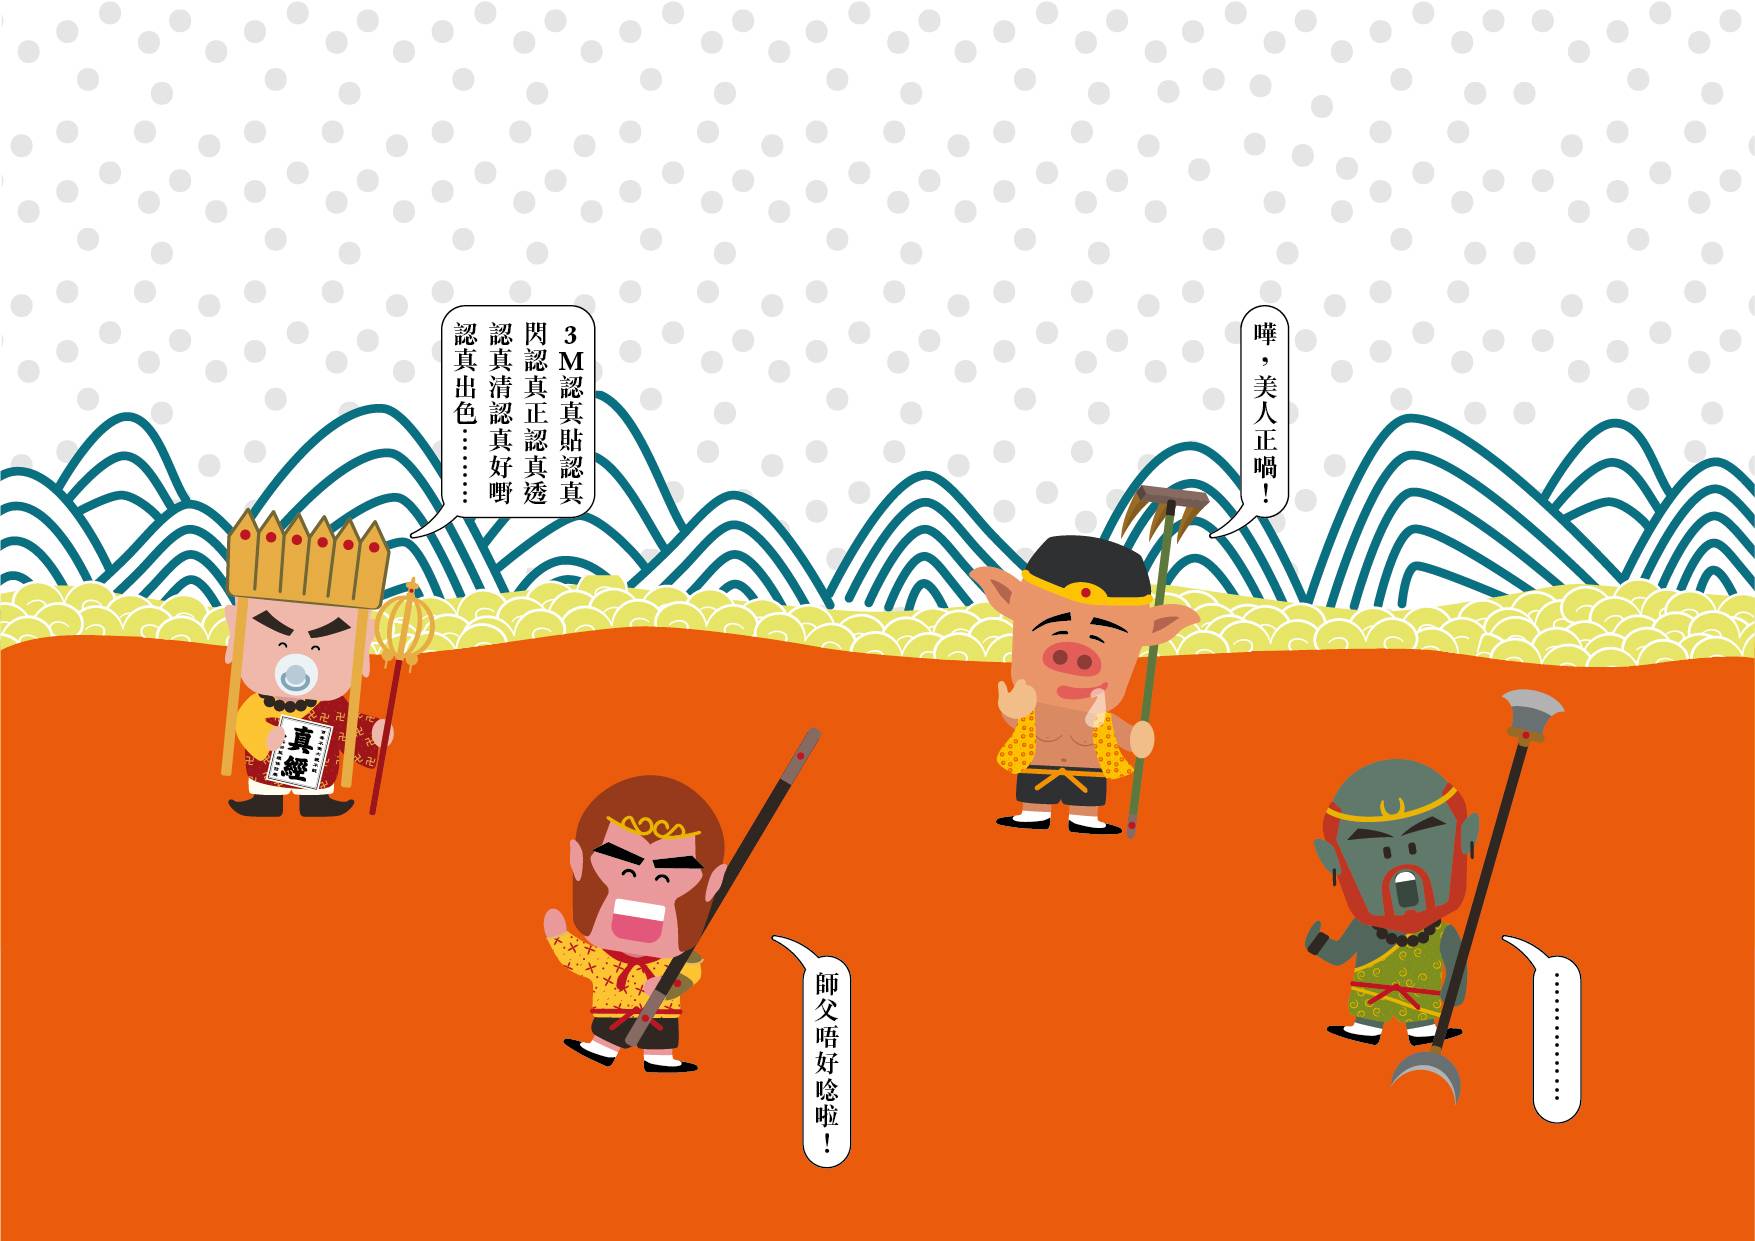 3M posters for design concept as Journey to the West with 4 Master & Apprentice communication